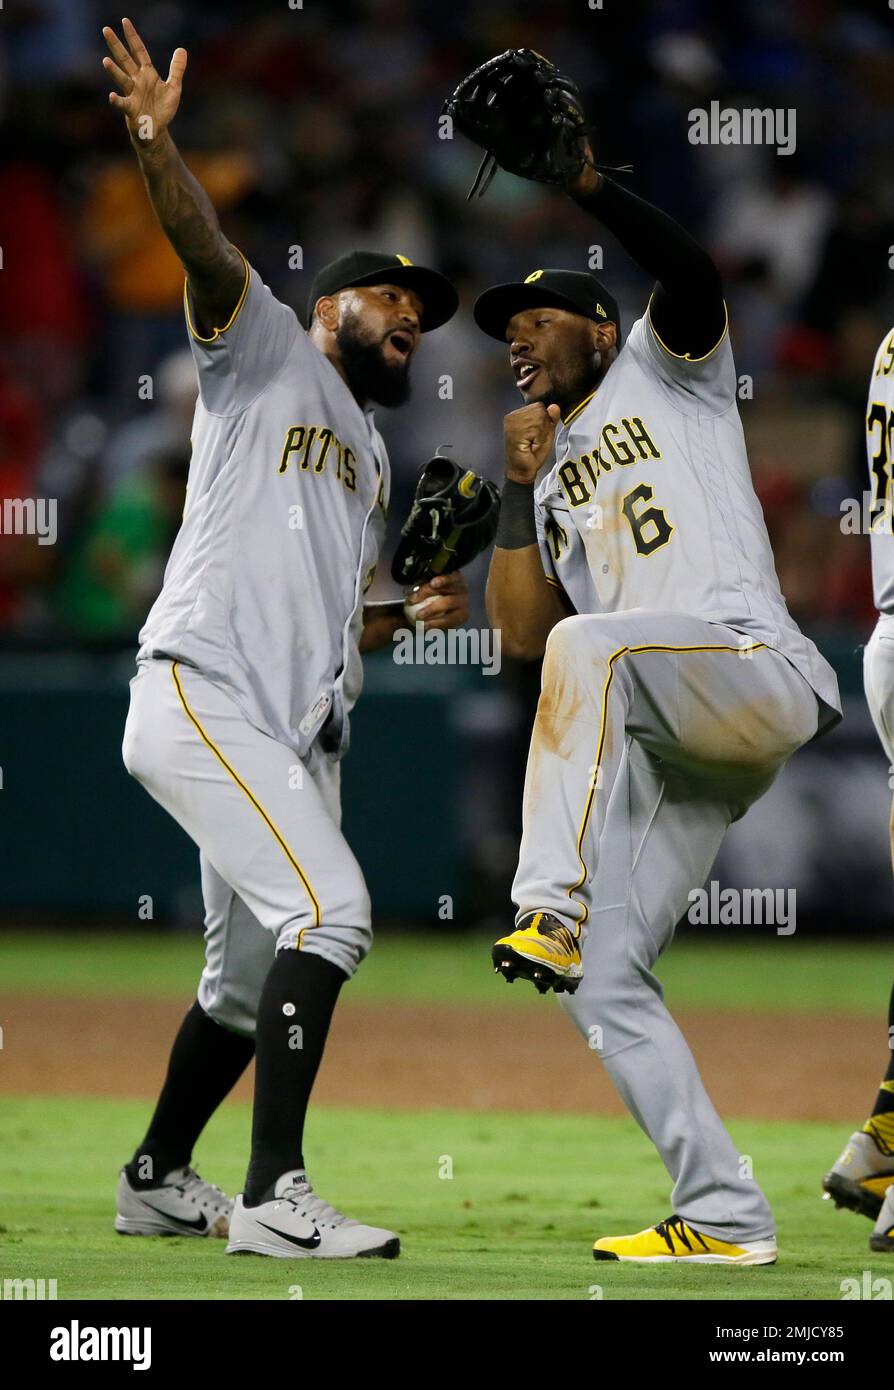 Pittsburgh Pirates relief pitcher Felipe Vazquez, left, celebrates with  center fielder Starling Marte after the Pirates defeated the Los Angeles  Angels 10-2 in a baseball game in Anaheim, Calif., Monday, Aug. 12